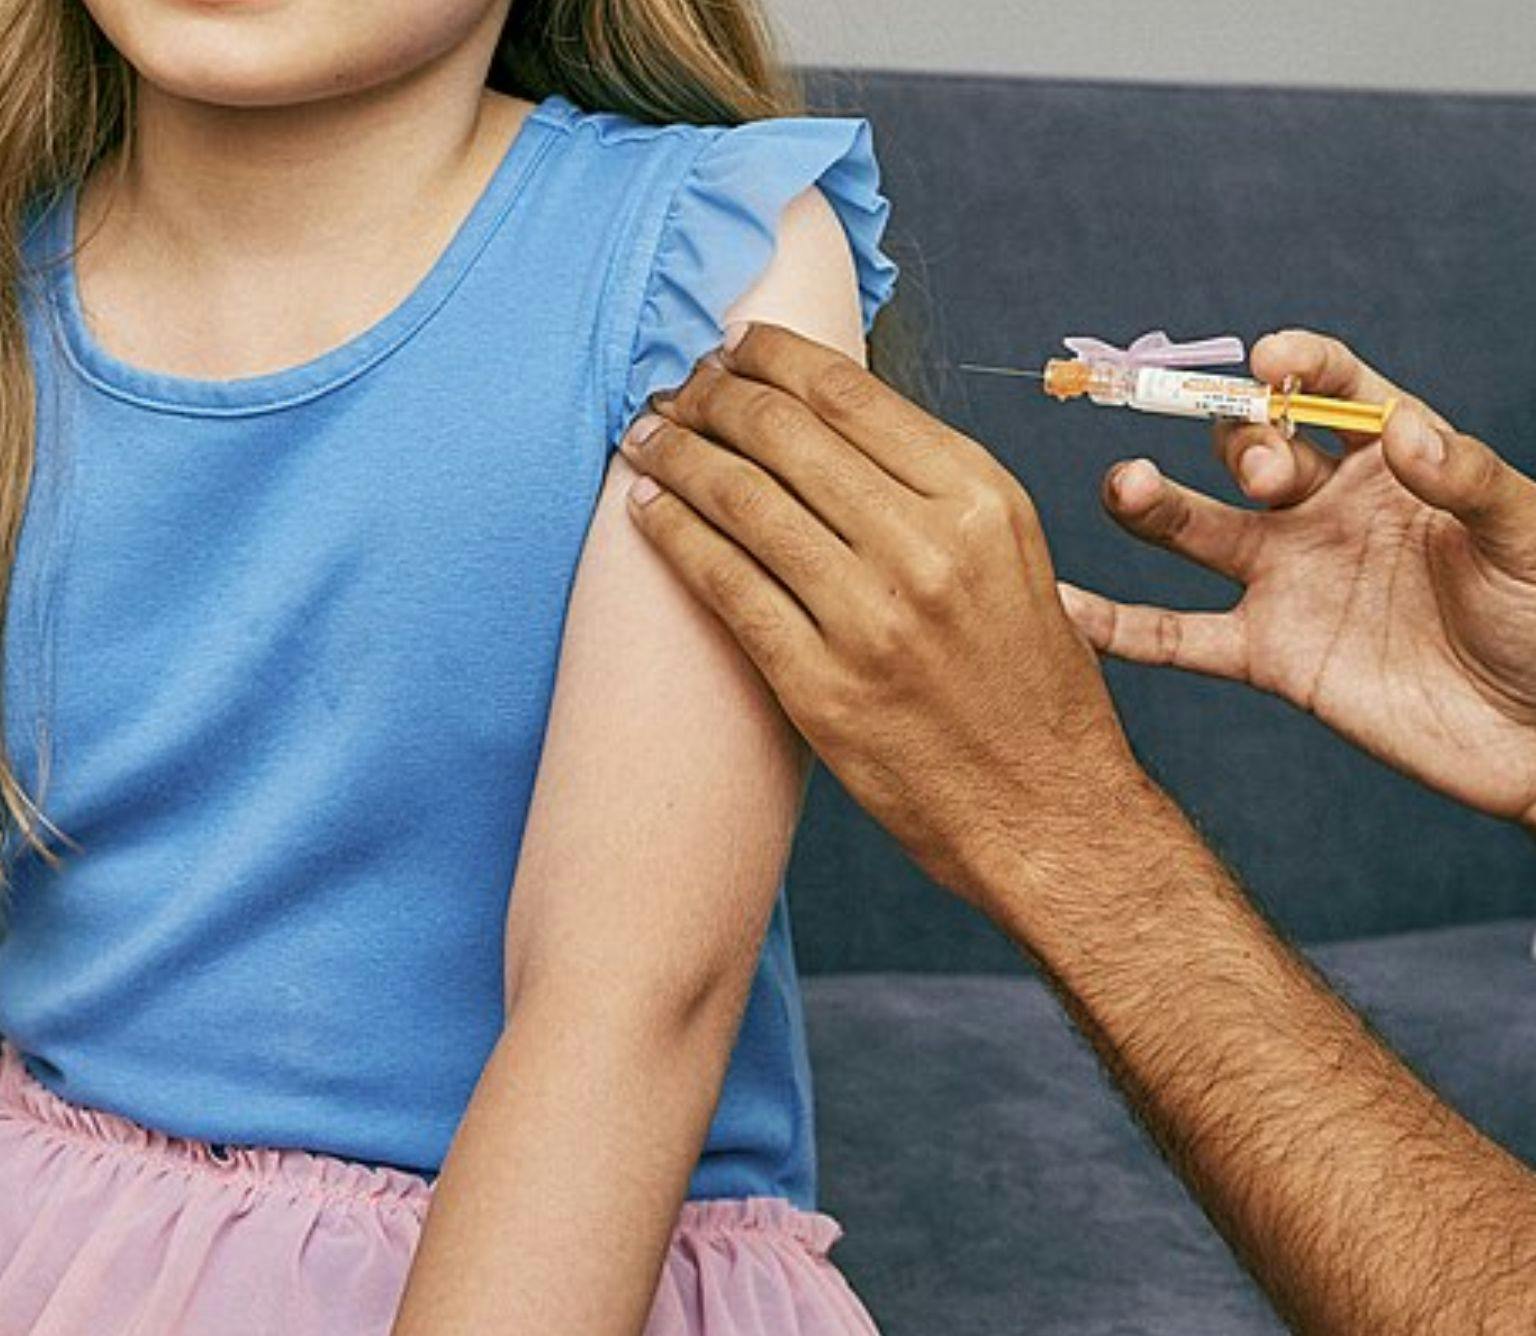 The torso and arm of a child in a blue shirt is visible. An adult is holding her arm with one hand and holding a vaccine syringe in the other hand.